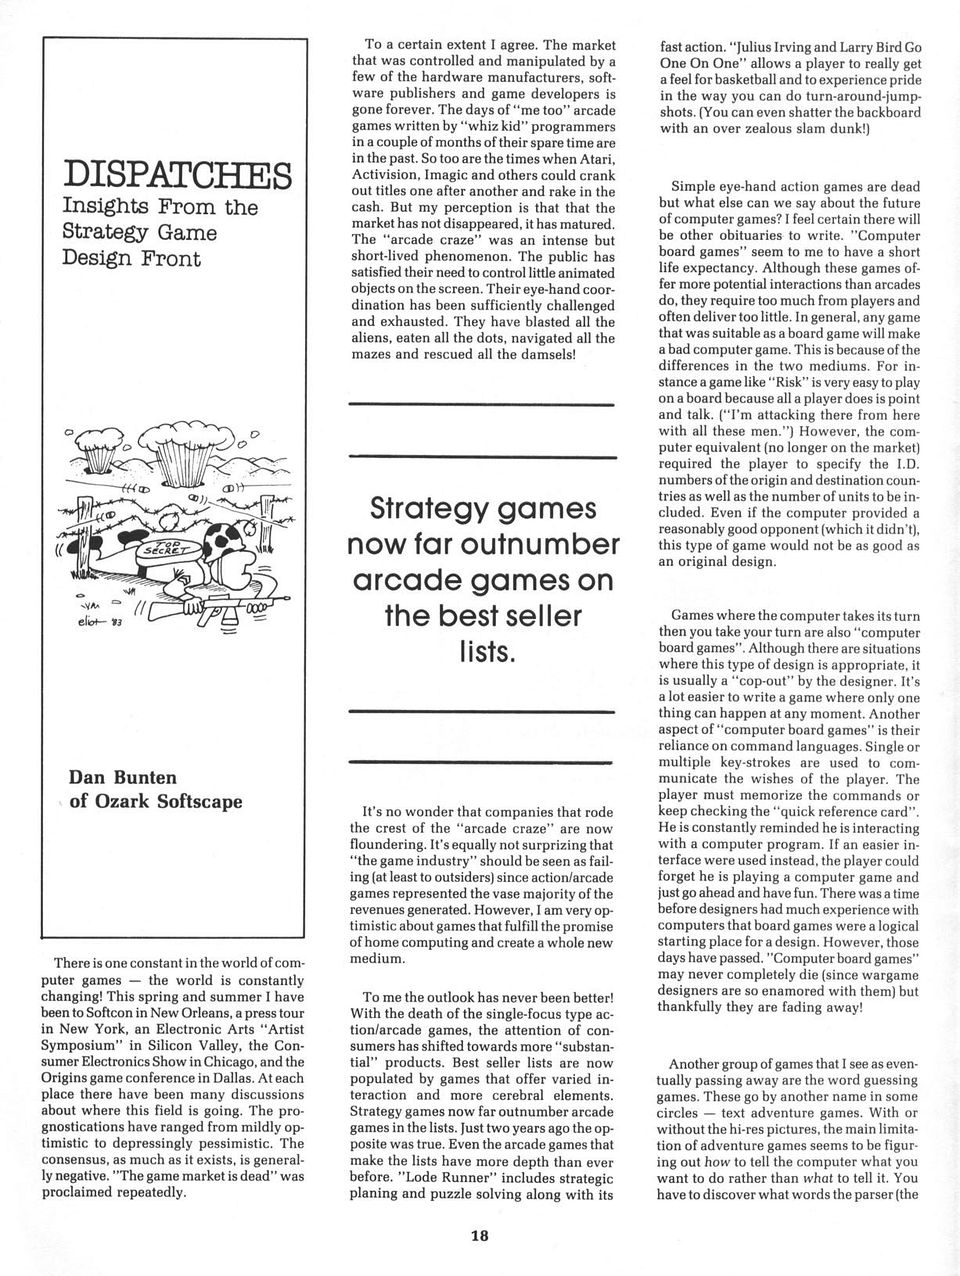 Dispatches Insights from the Strategy Game Design Front